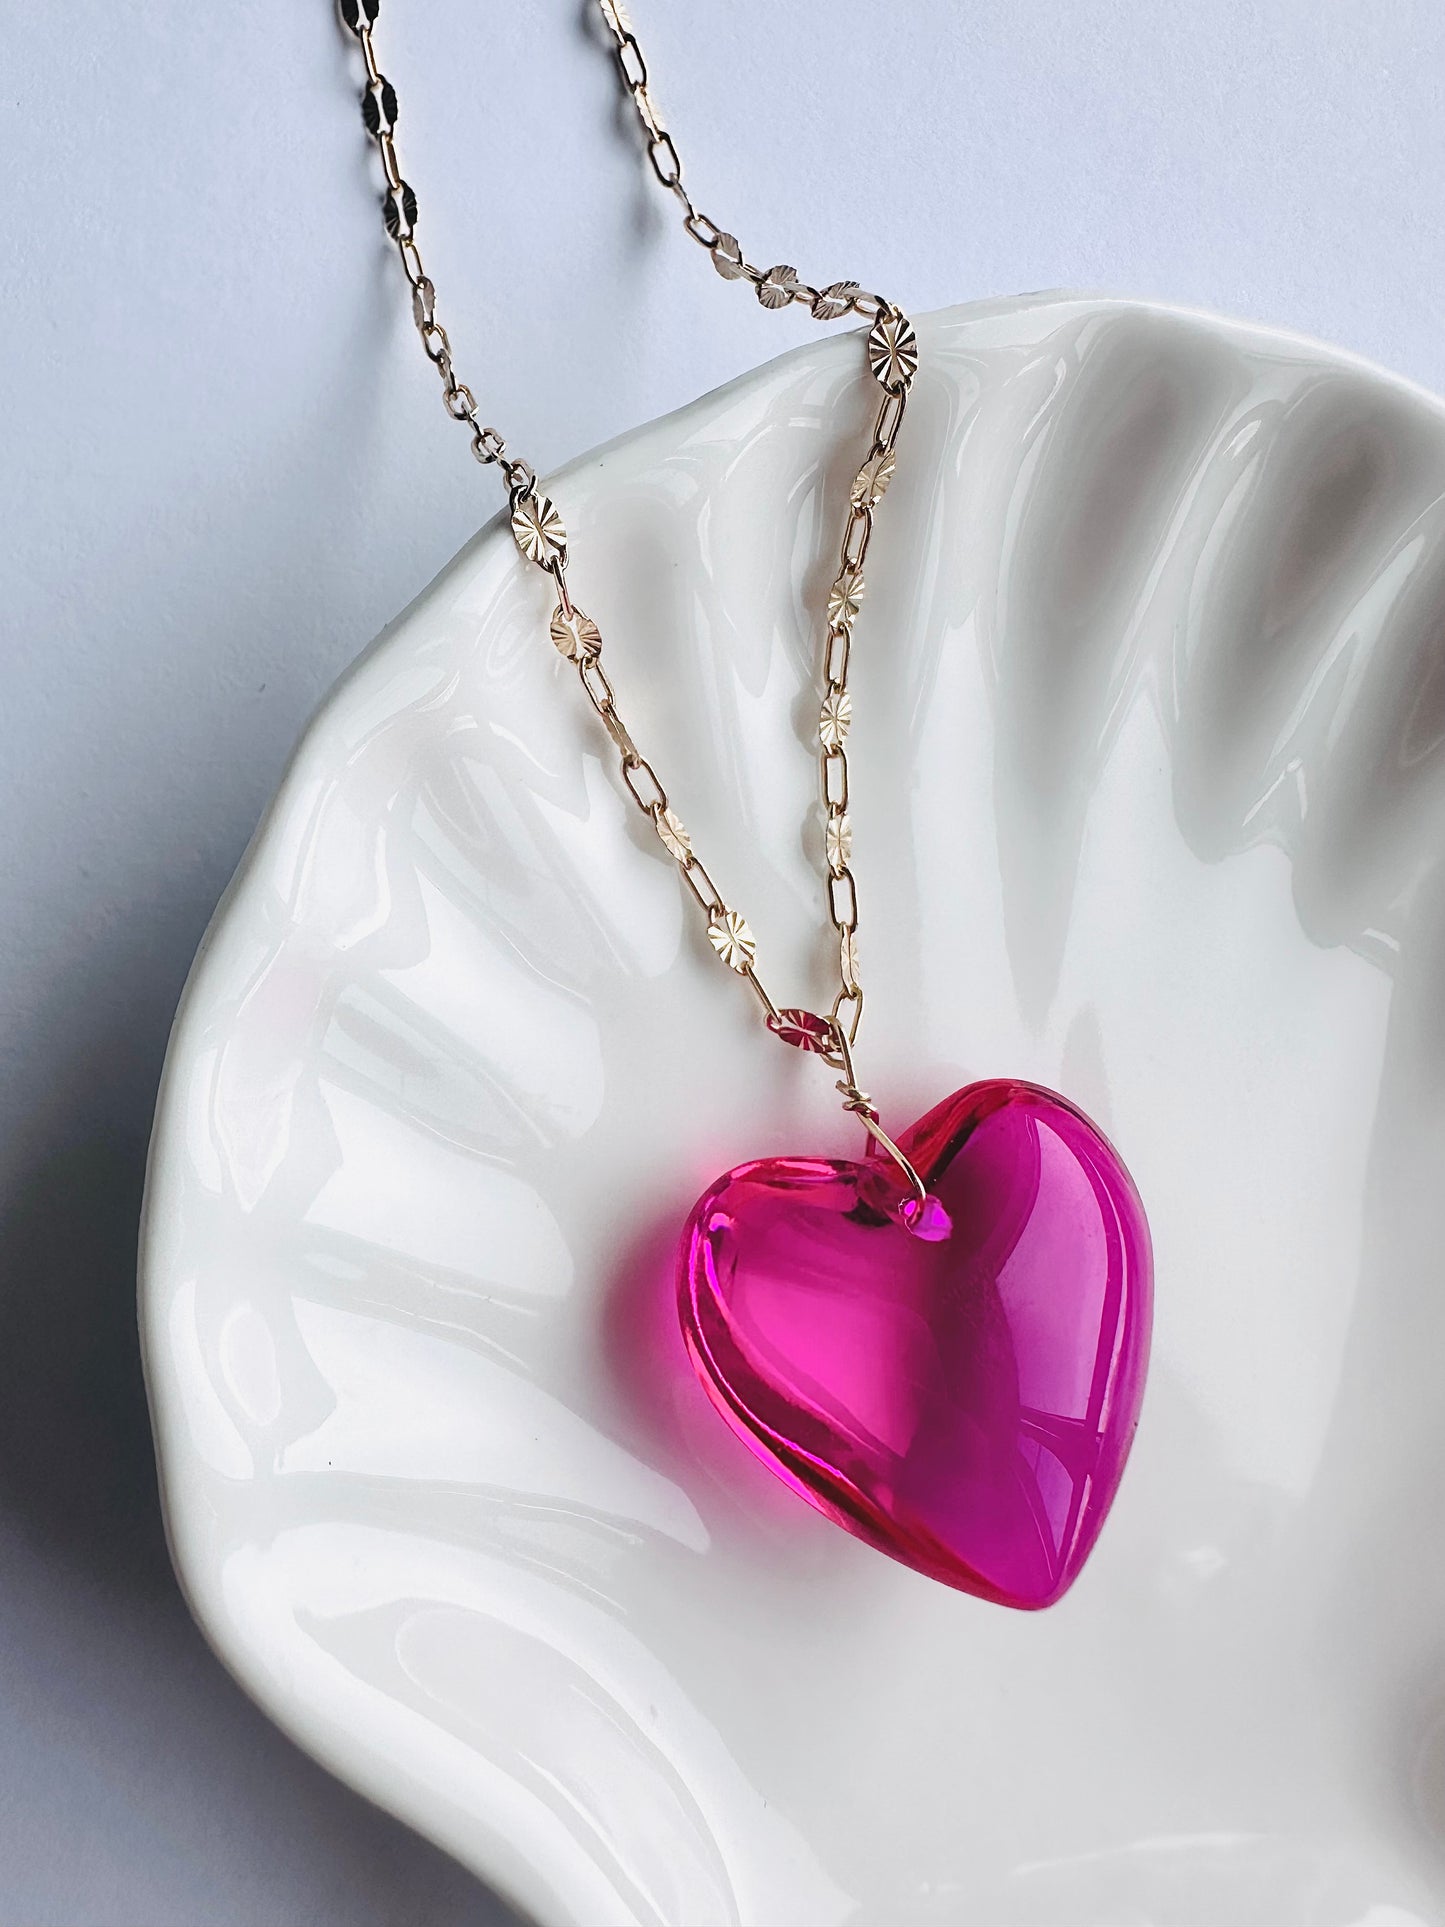 Sun-Kissed Heart Necklace